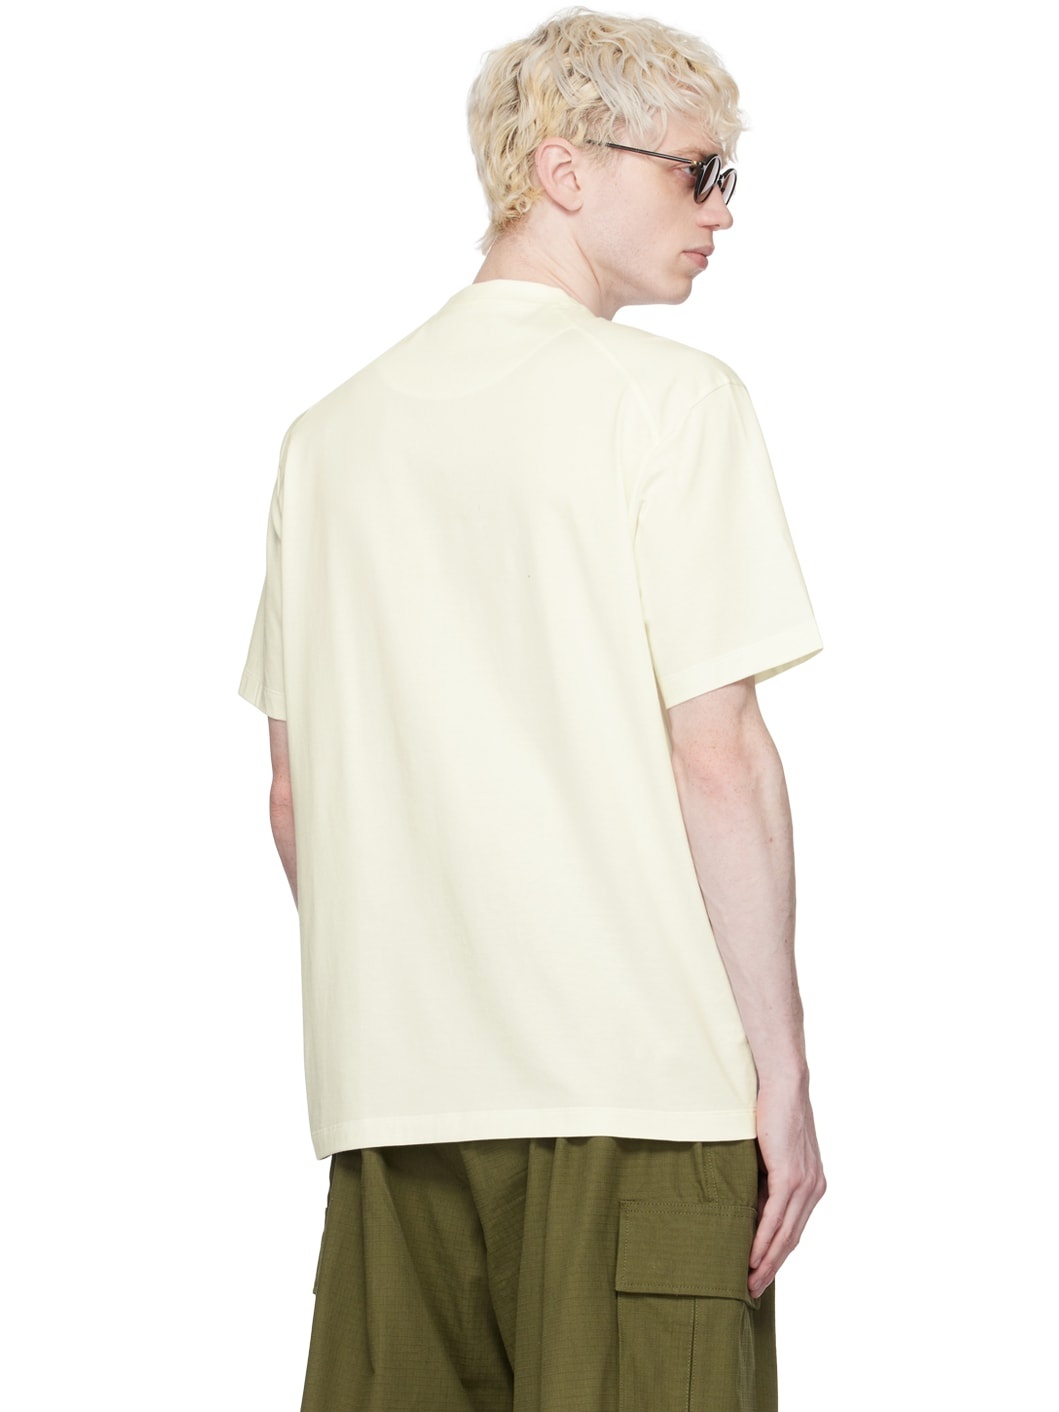 Off-White Graphic T-Shirt - 3